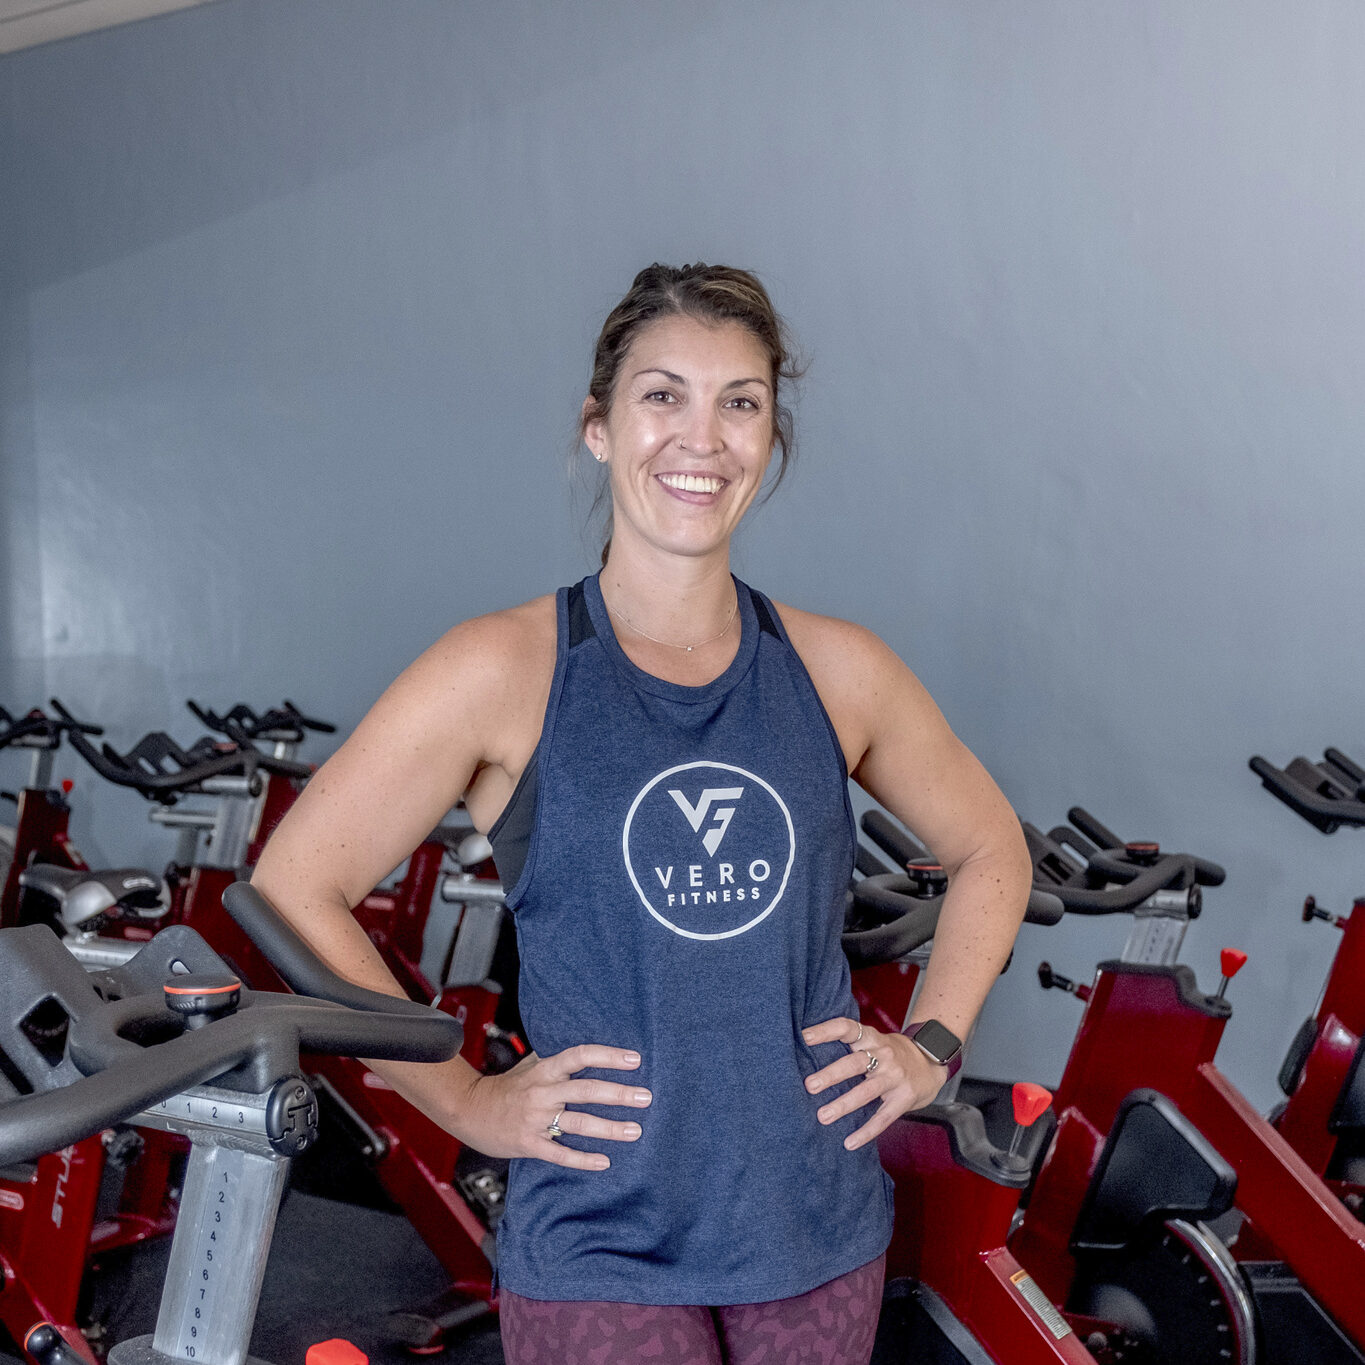 Fitness musts and myths: What exercise advice to follow – Vero News